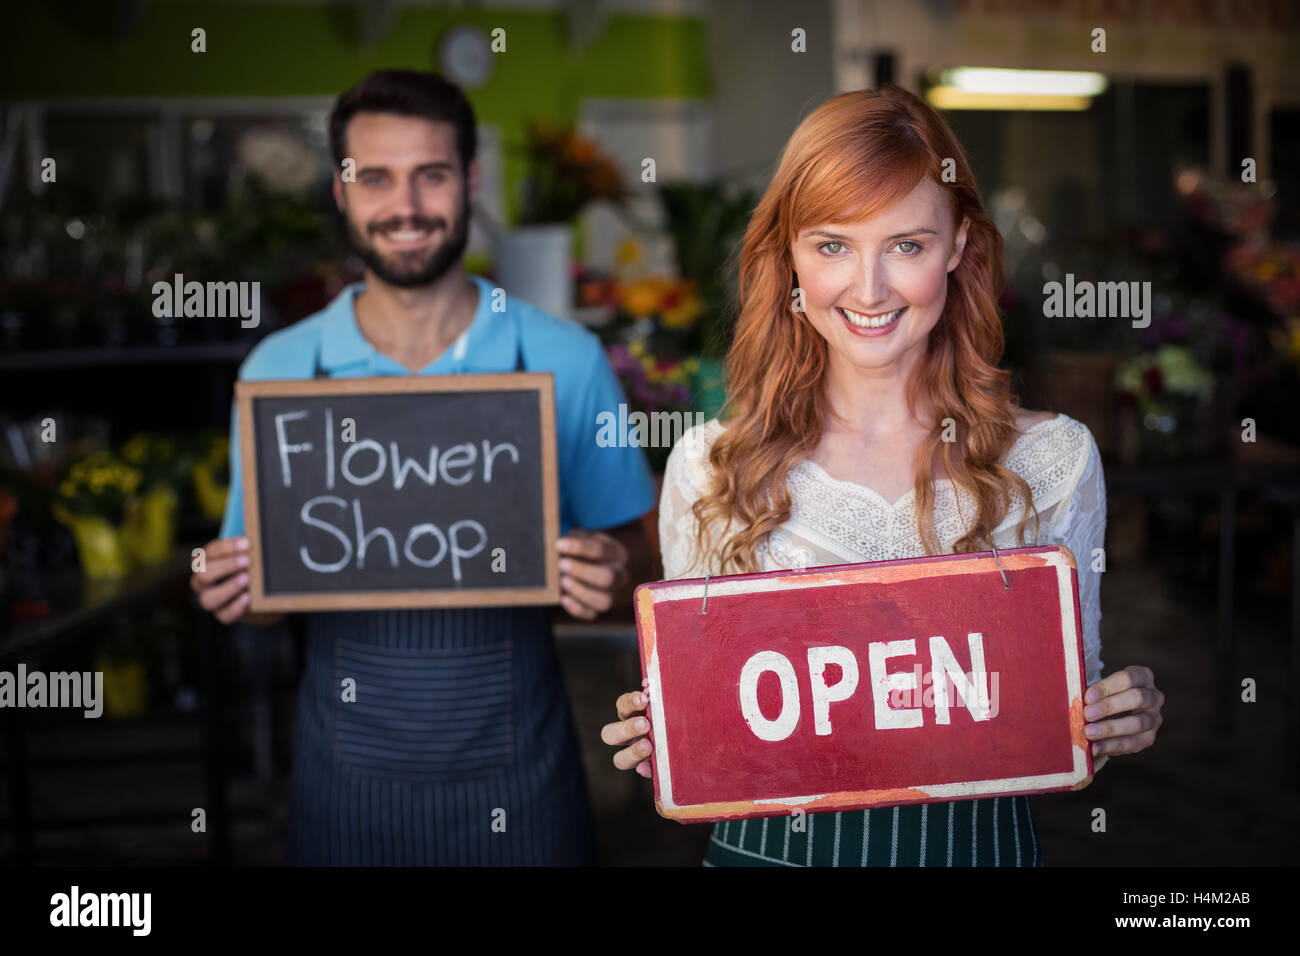 Woman holding open signboard and man holding slate with flower shop sign Stock Photo